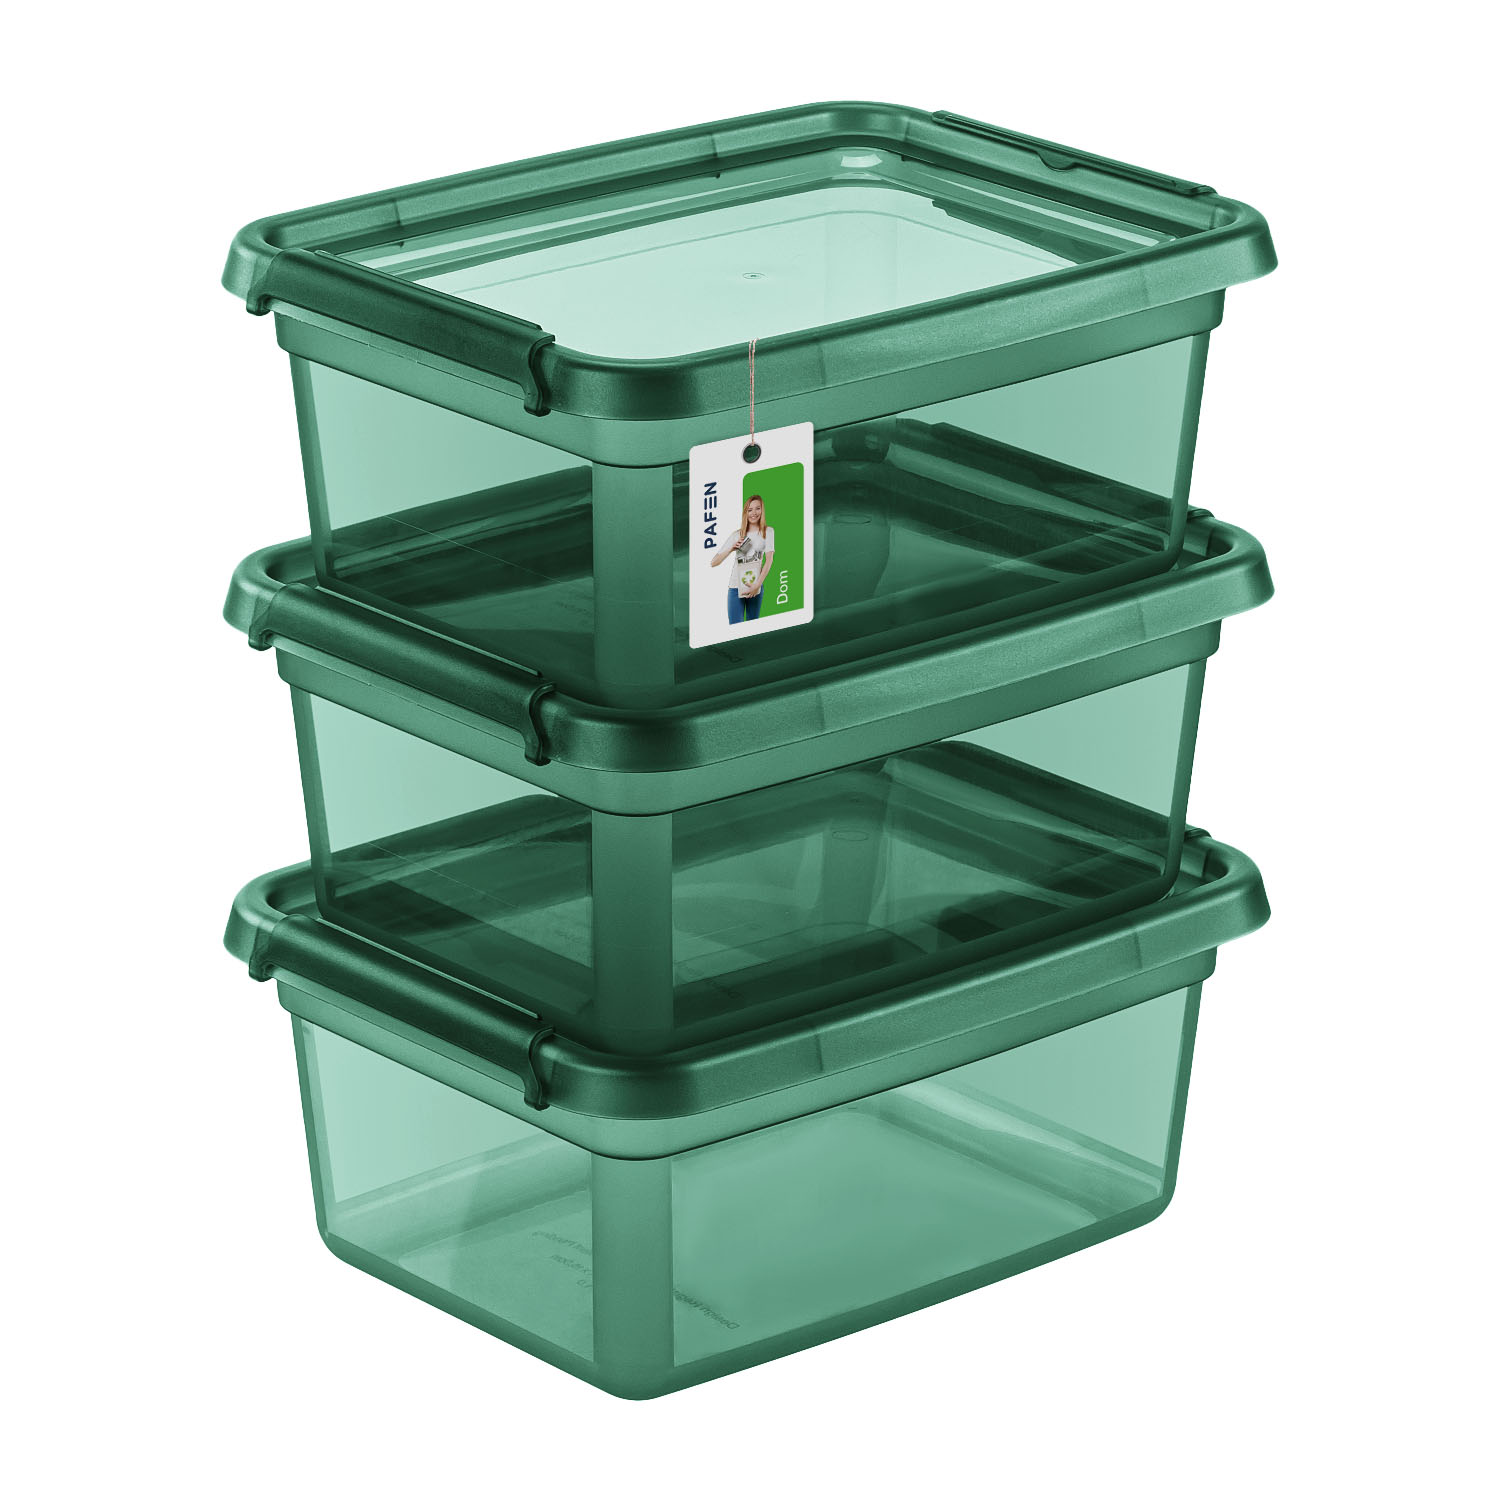 BaseStore Color 2522 Transparent green storage container set